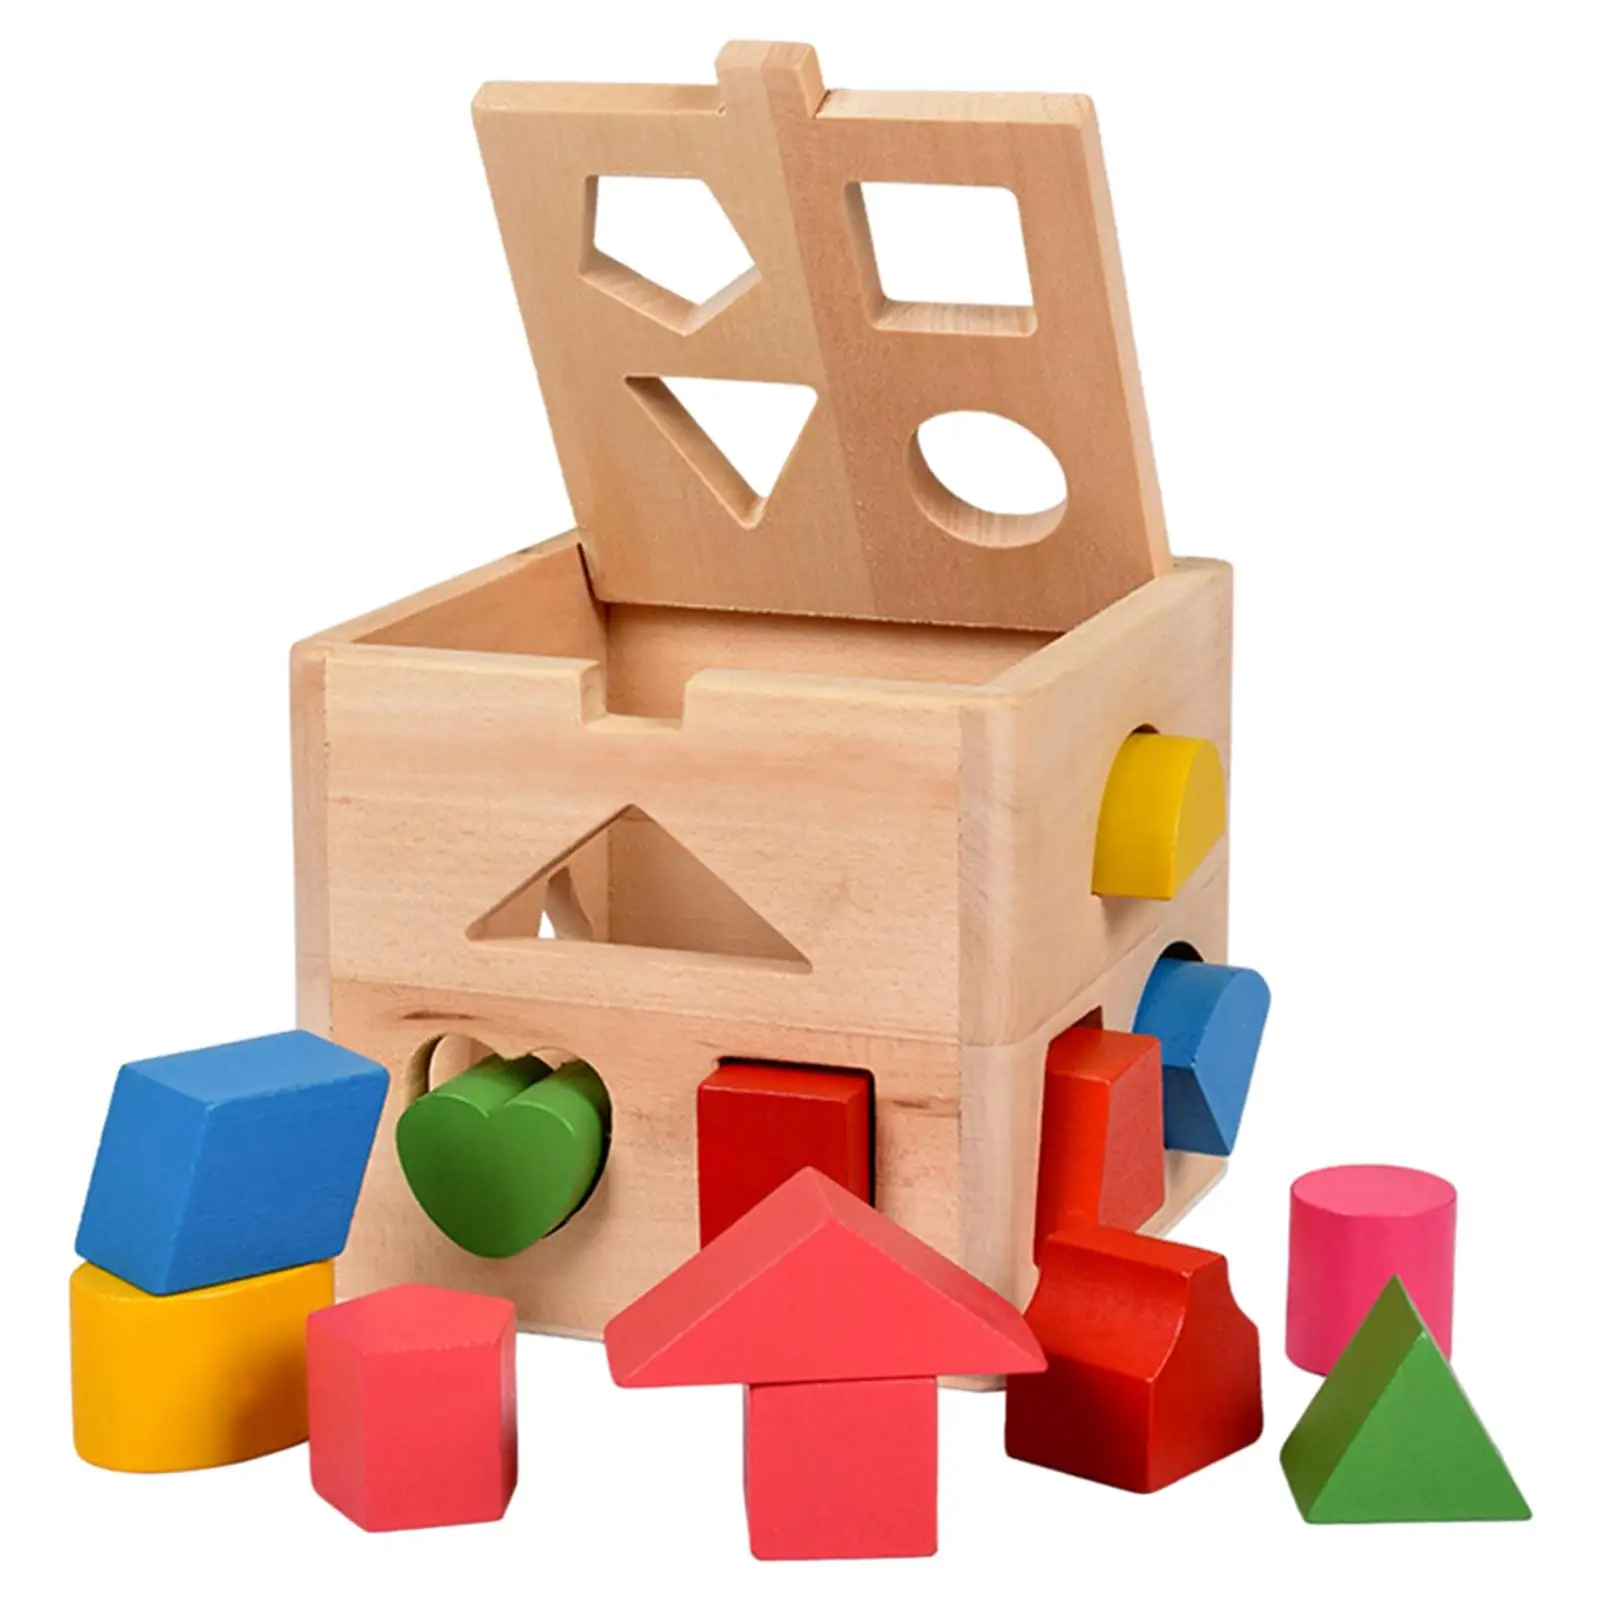 Wooden Shape Sorter Cube Early Educational Learning Toy Montessori Toys for Children Toddlers Preschool Boy Children Gift